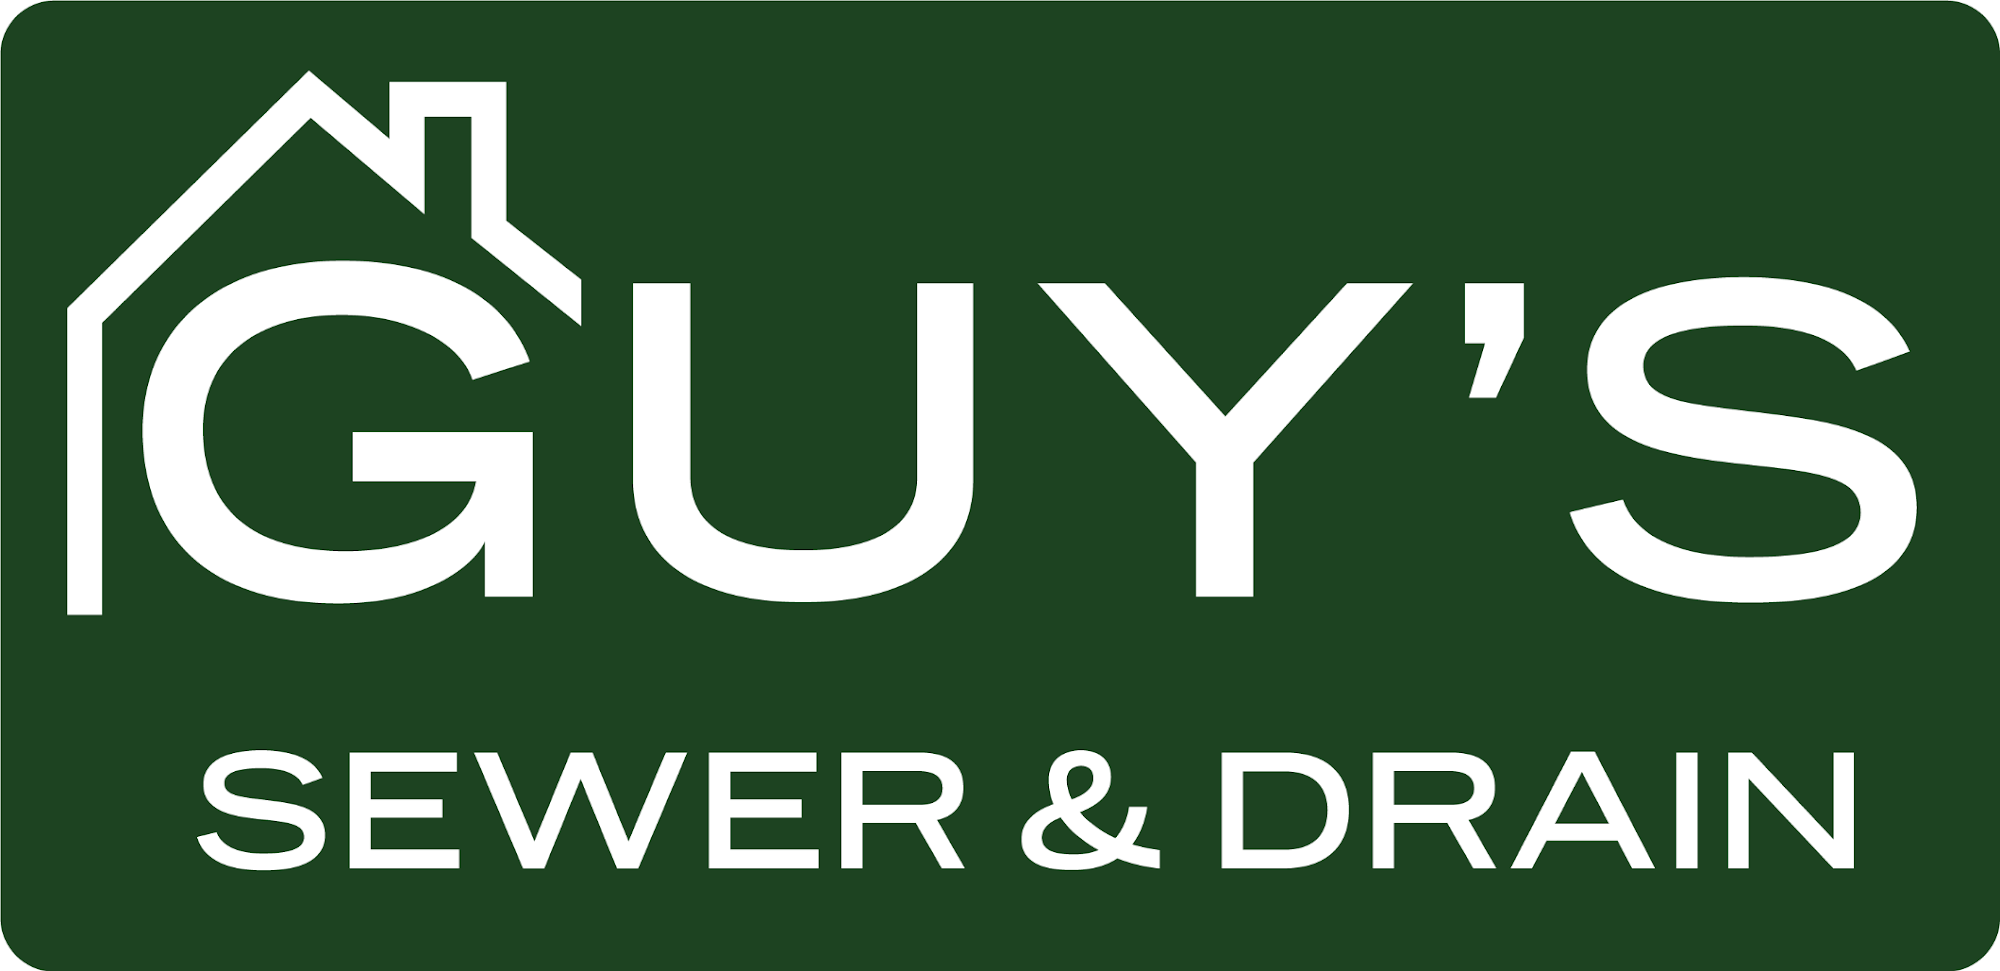 Guy's Sewer & Drain 321 Willow Dr SW, St Michael Minnesota 55376